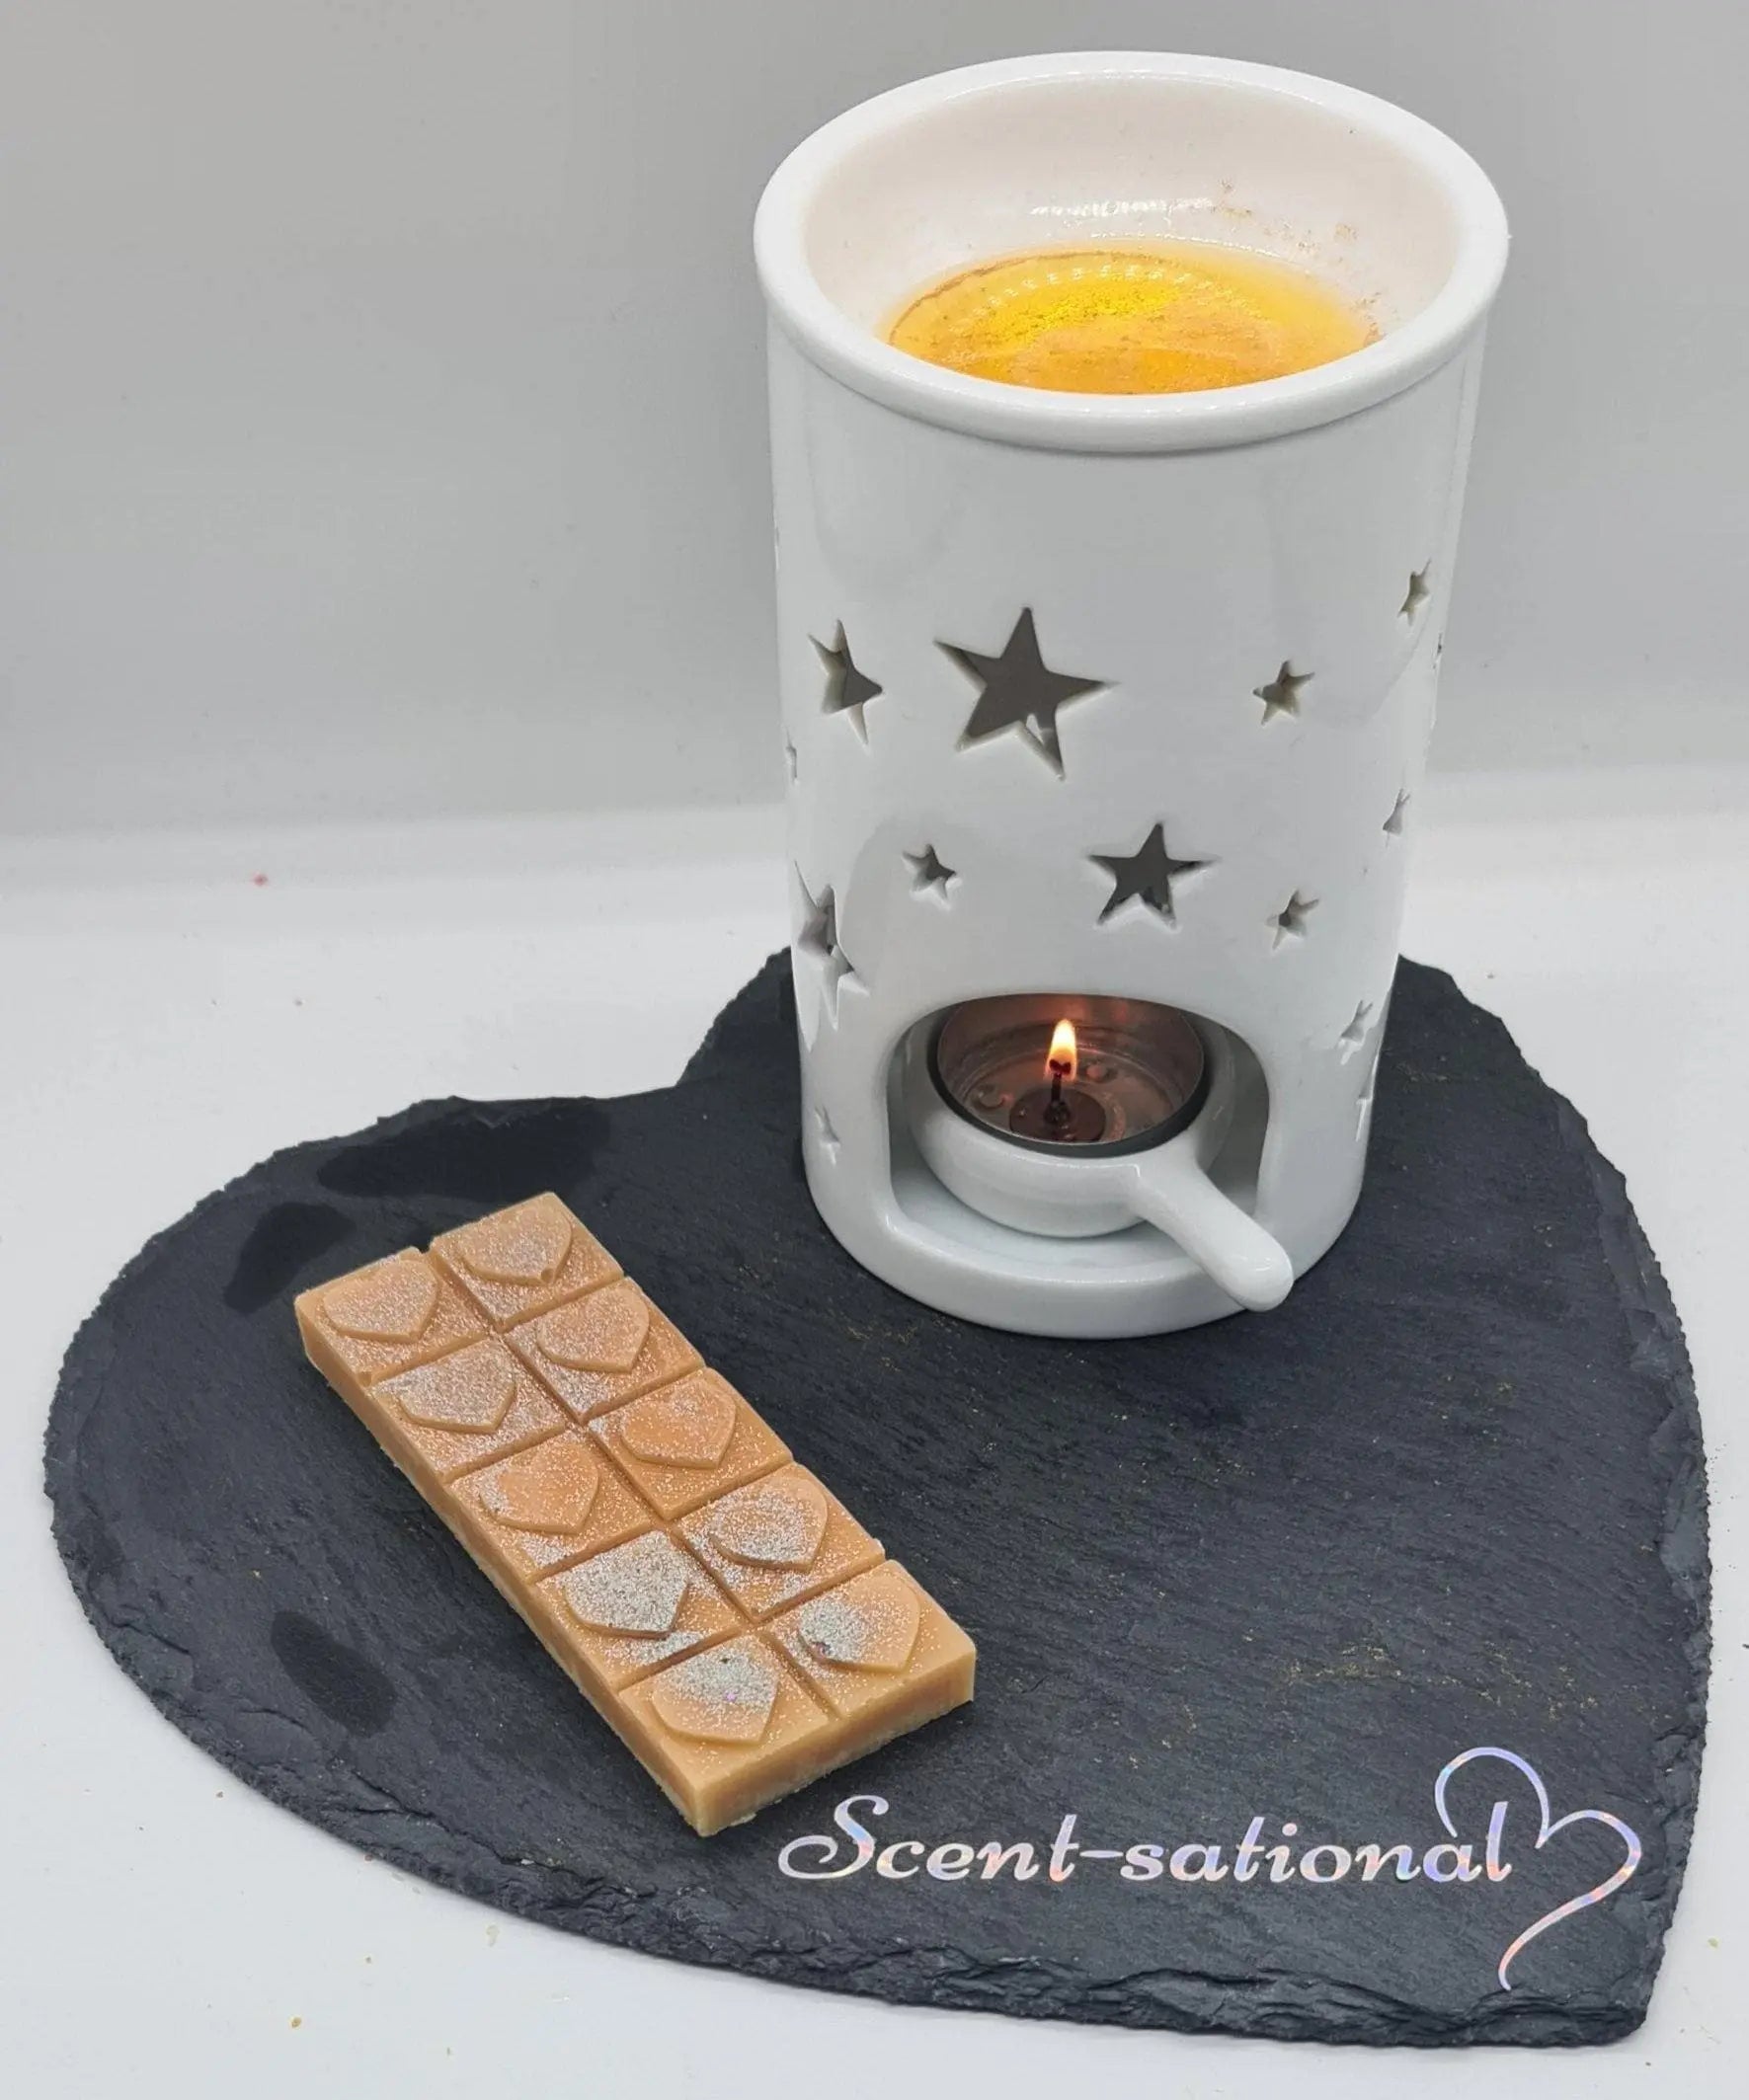 Caramelised Biscuit Wax Melts Scent Sational Wax melts